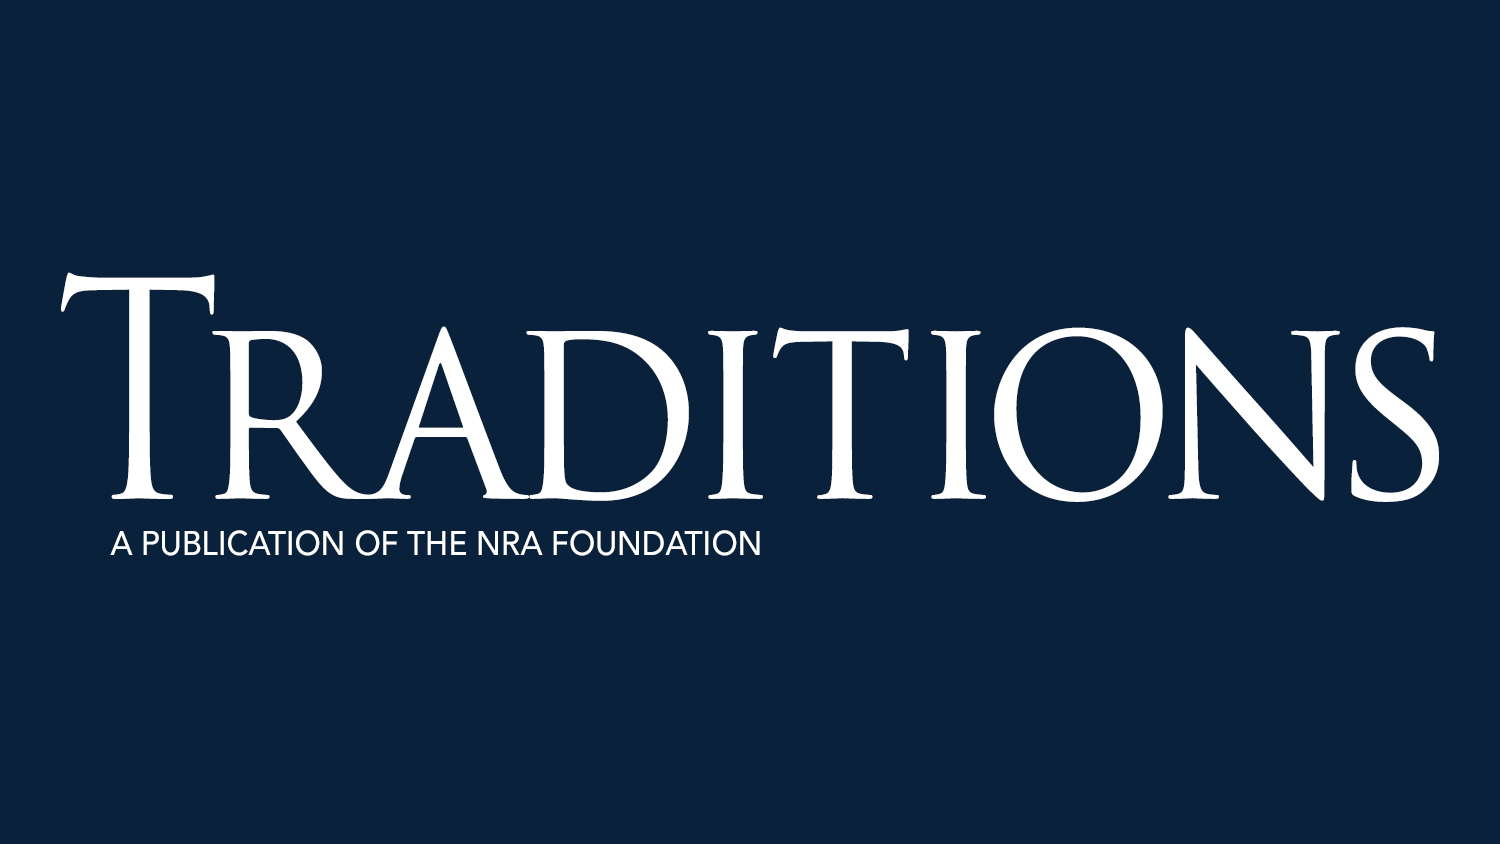 Read the Latest Issue of Traditions From The NRA Foundation